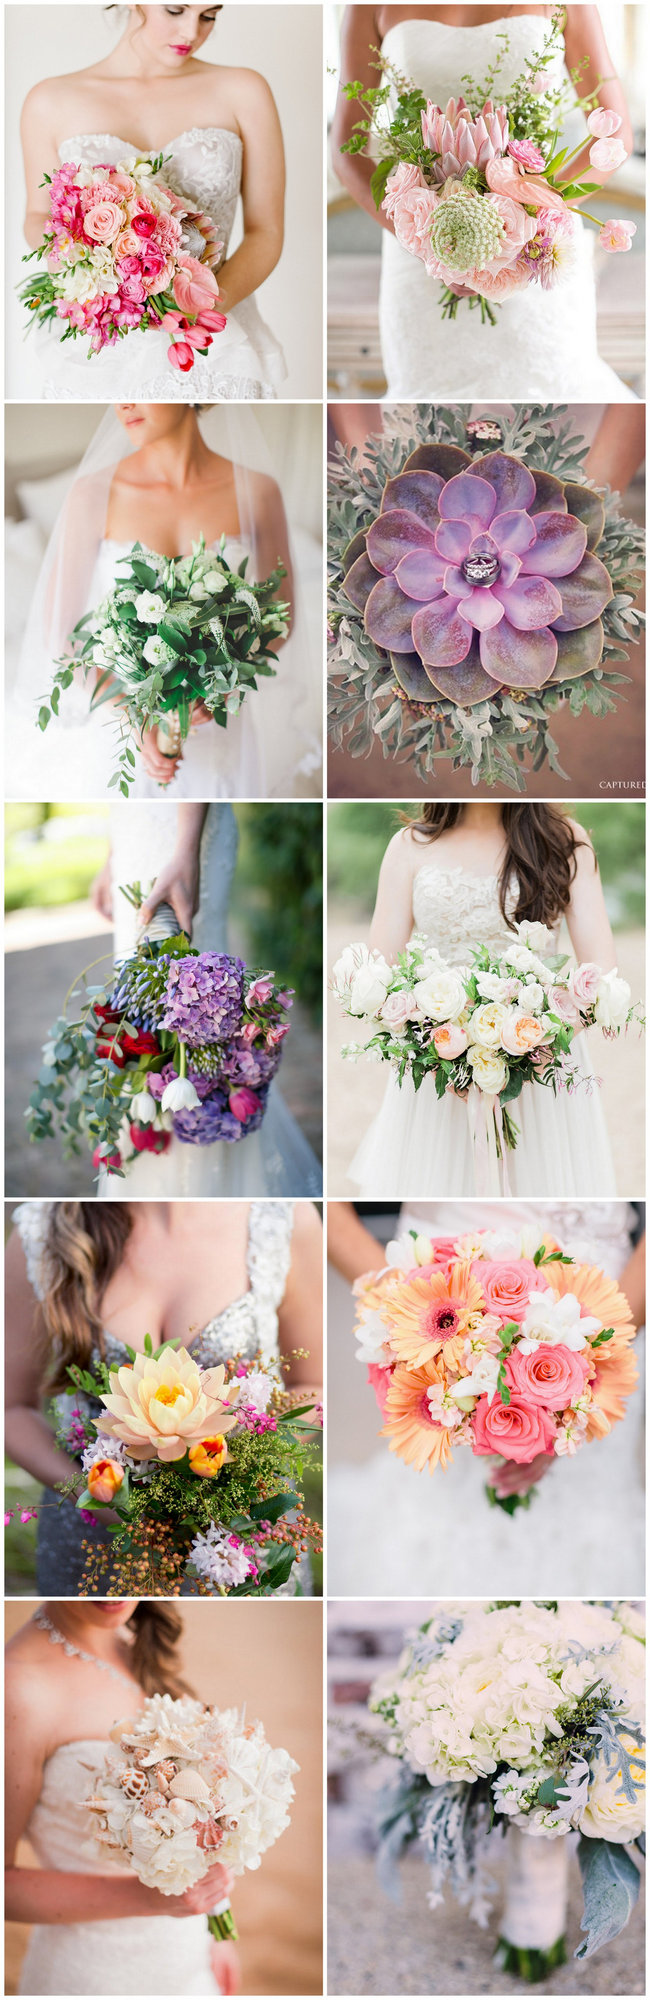 25 Breathtaking Wedding Bouquets You'll Want To Steal!